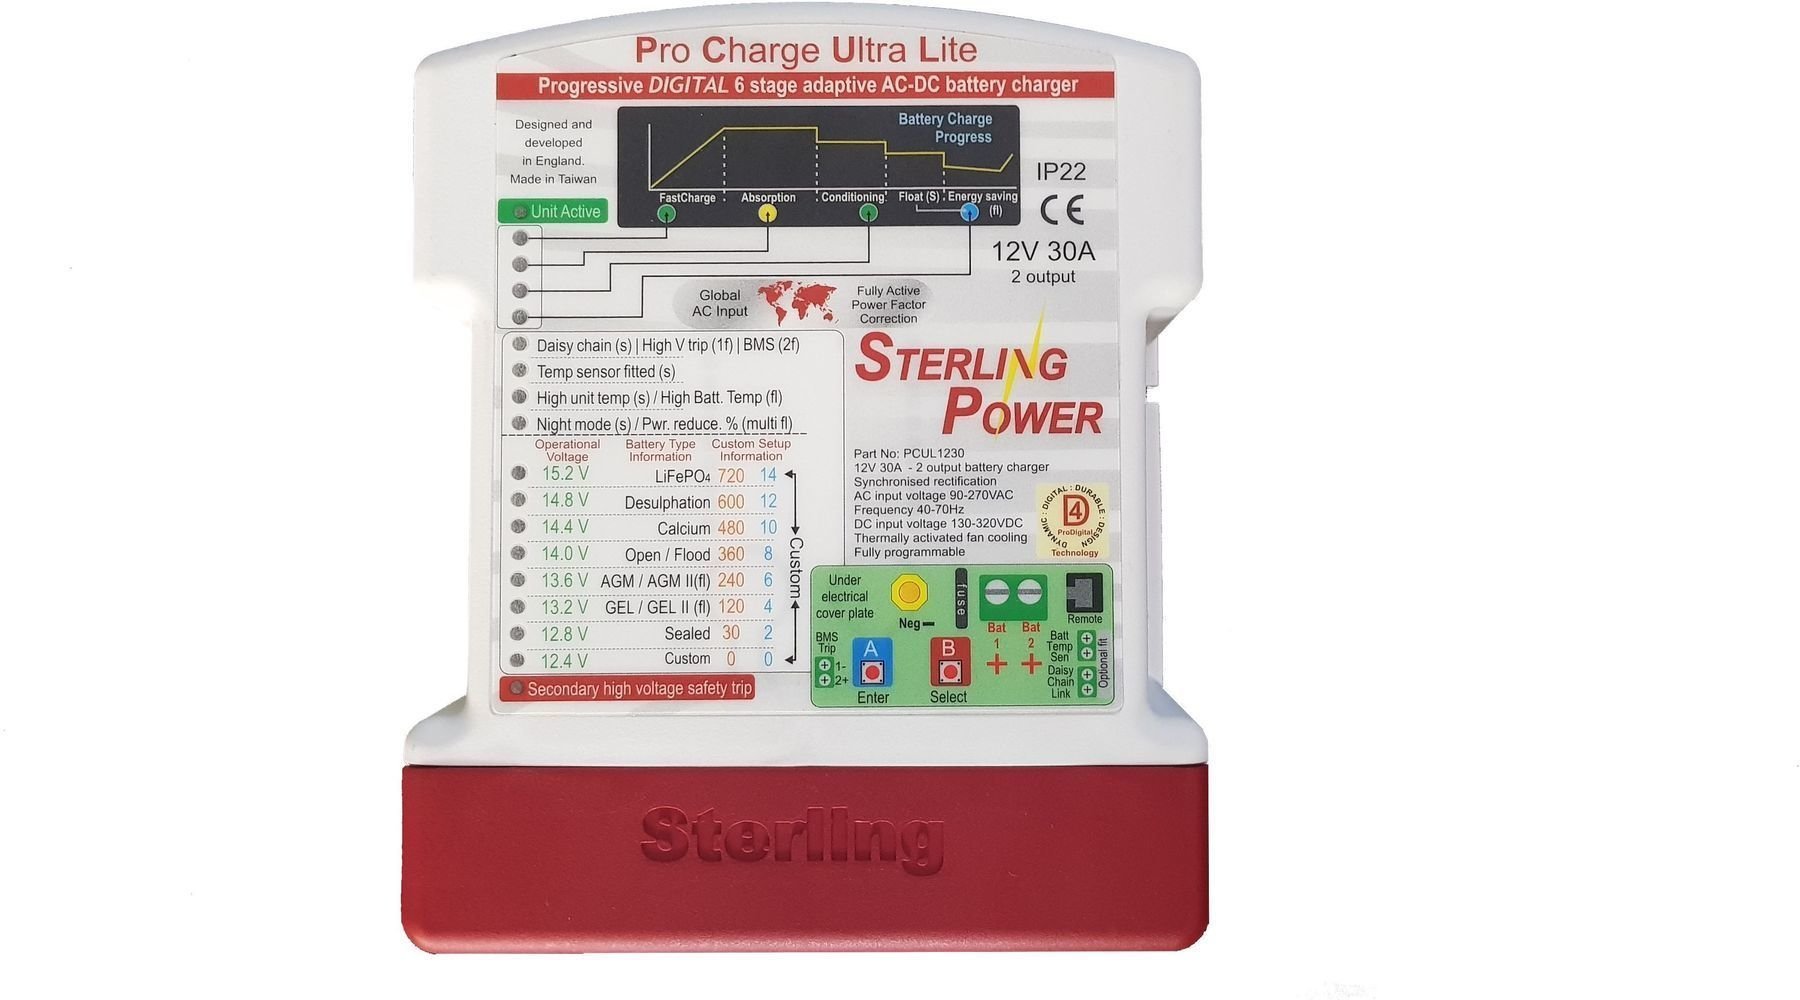 Chargeur marine Sterling Power Pro Charge Ultra Lite